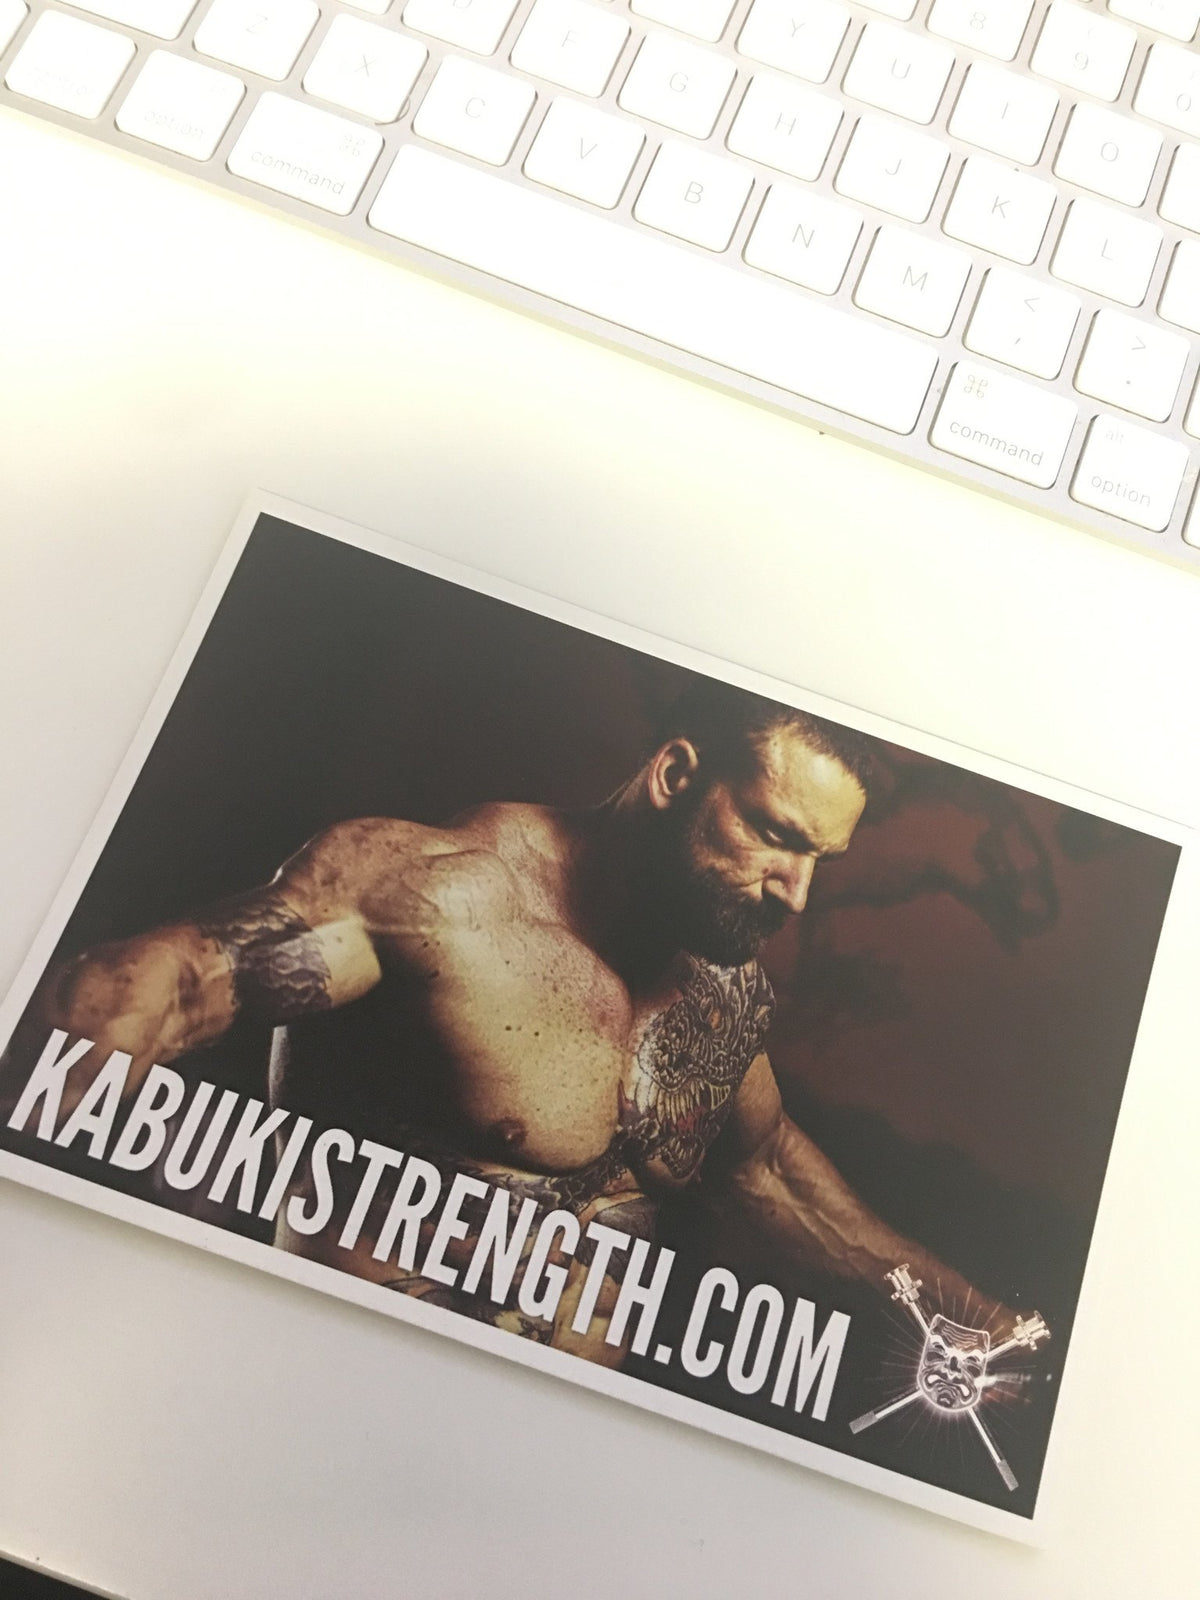 Signed Card by Chris Duffin - Kabuki Strength Store